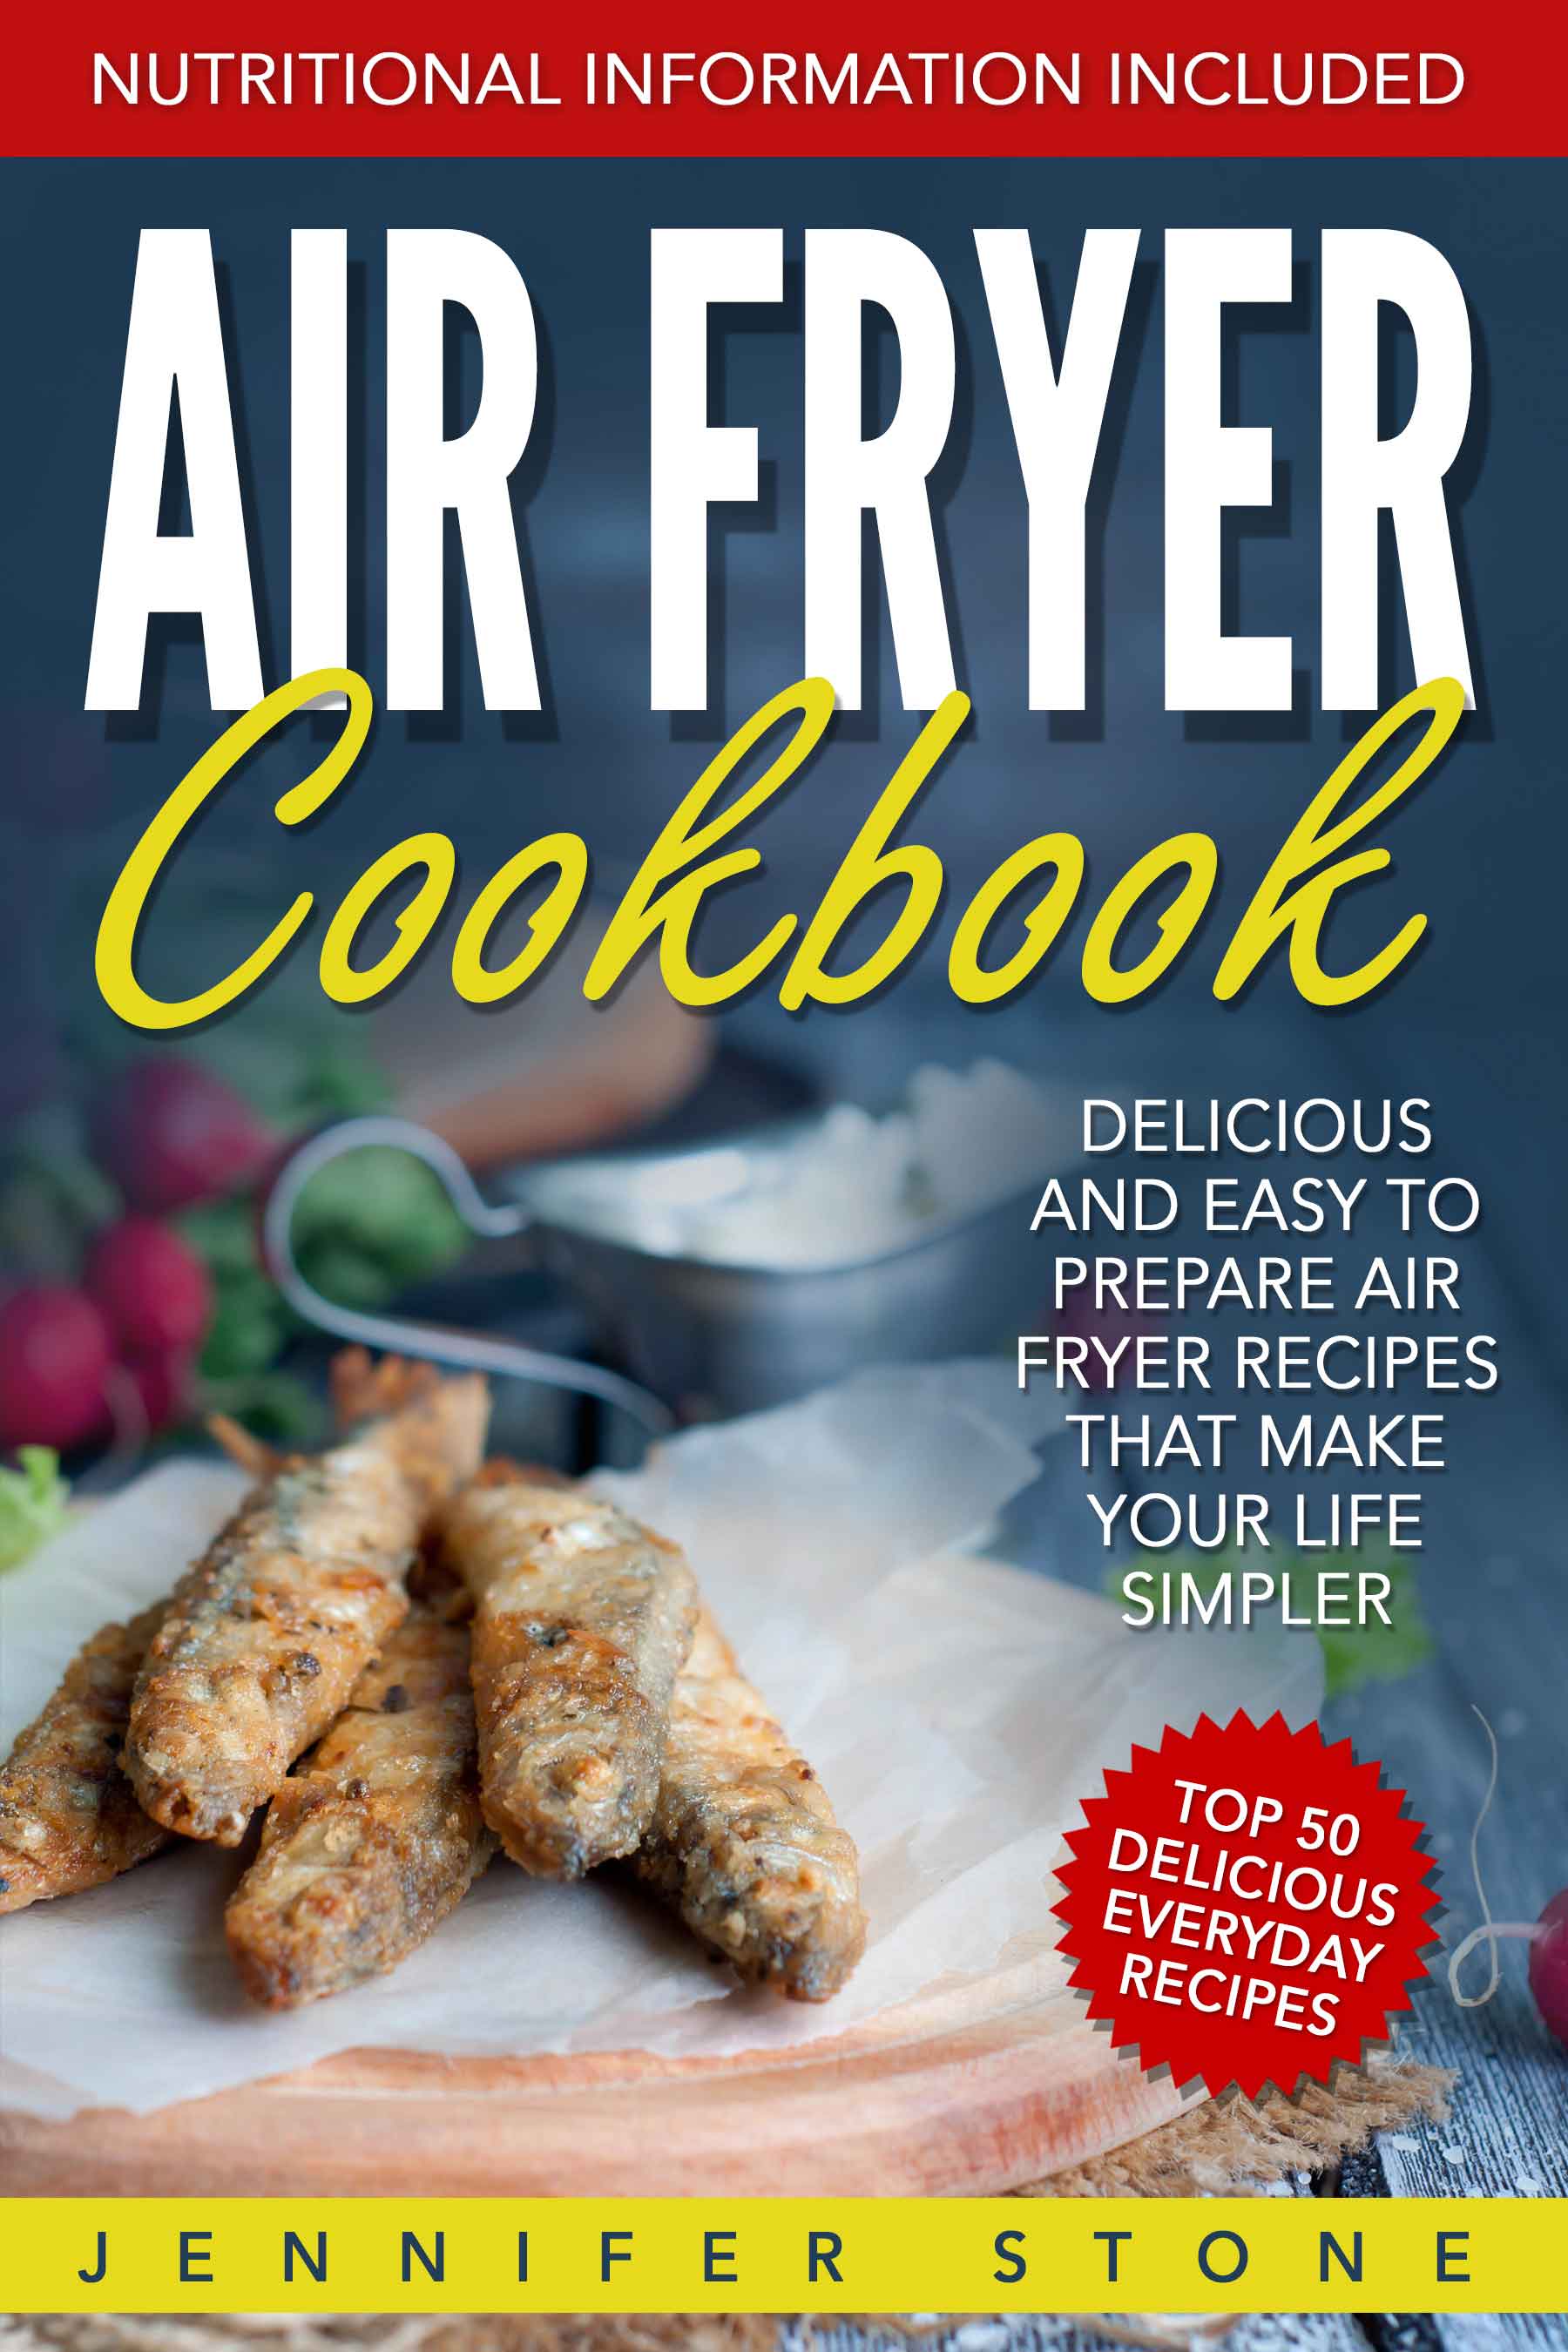 FREE: Air Fryer Сookbook: Delicious and Easy to Prepare Air Fryer Recipes That Make Your Life Simpler by Jennifer Stone